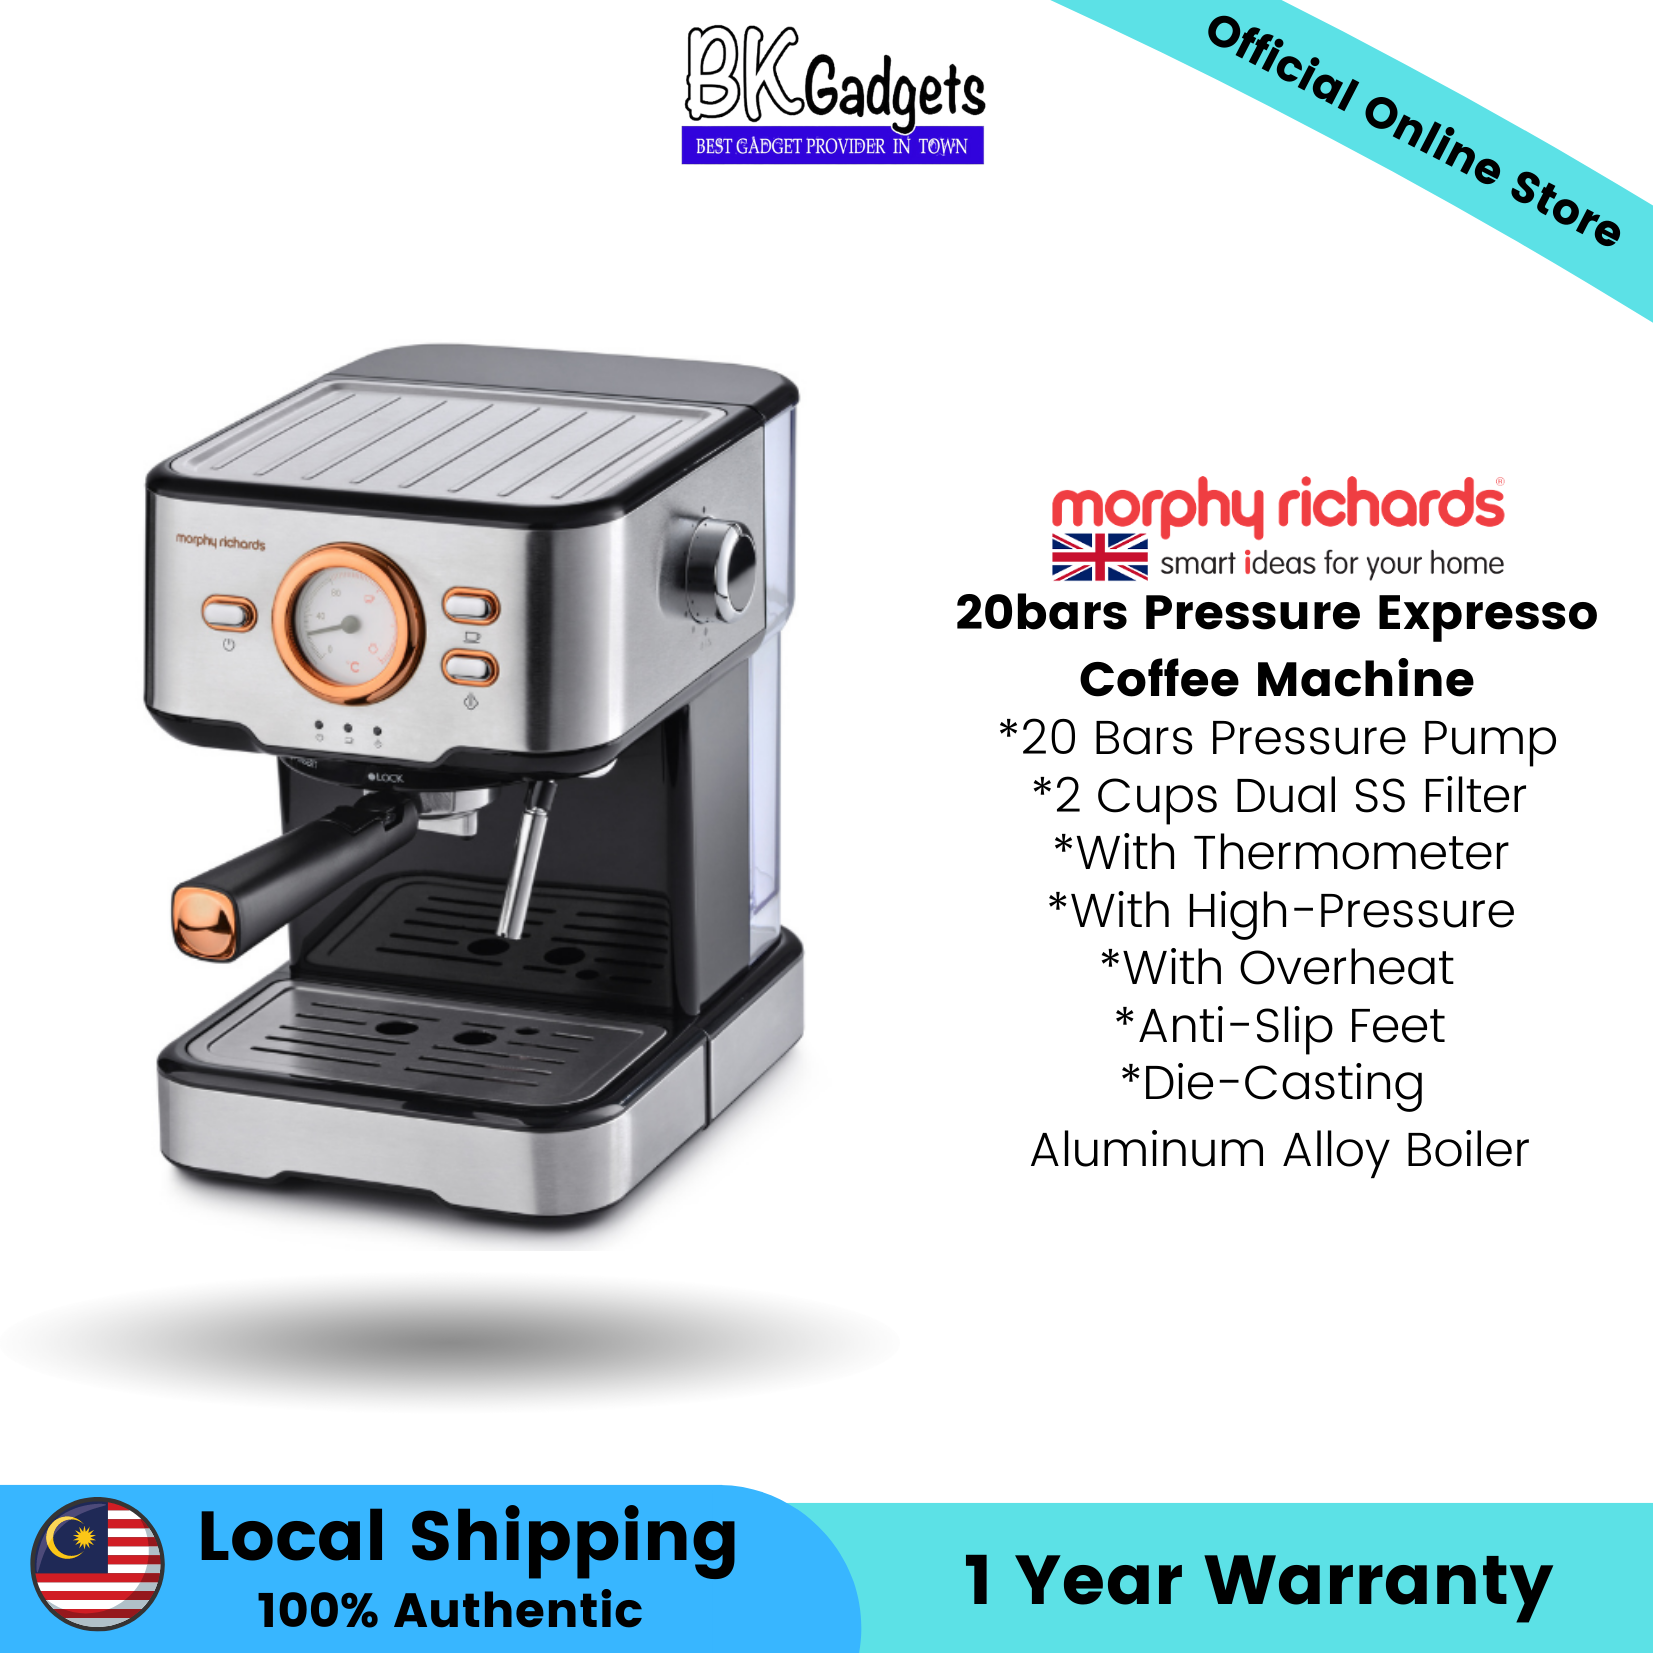 Morphy Richards 20bars Pressure Expresso Coffee Machine - 20bars Pressure Pump | 2 Cups Dual SS Filter | With Thermometer